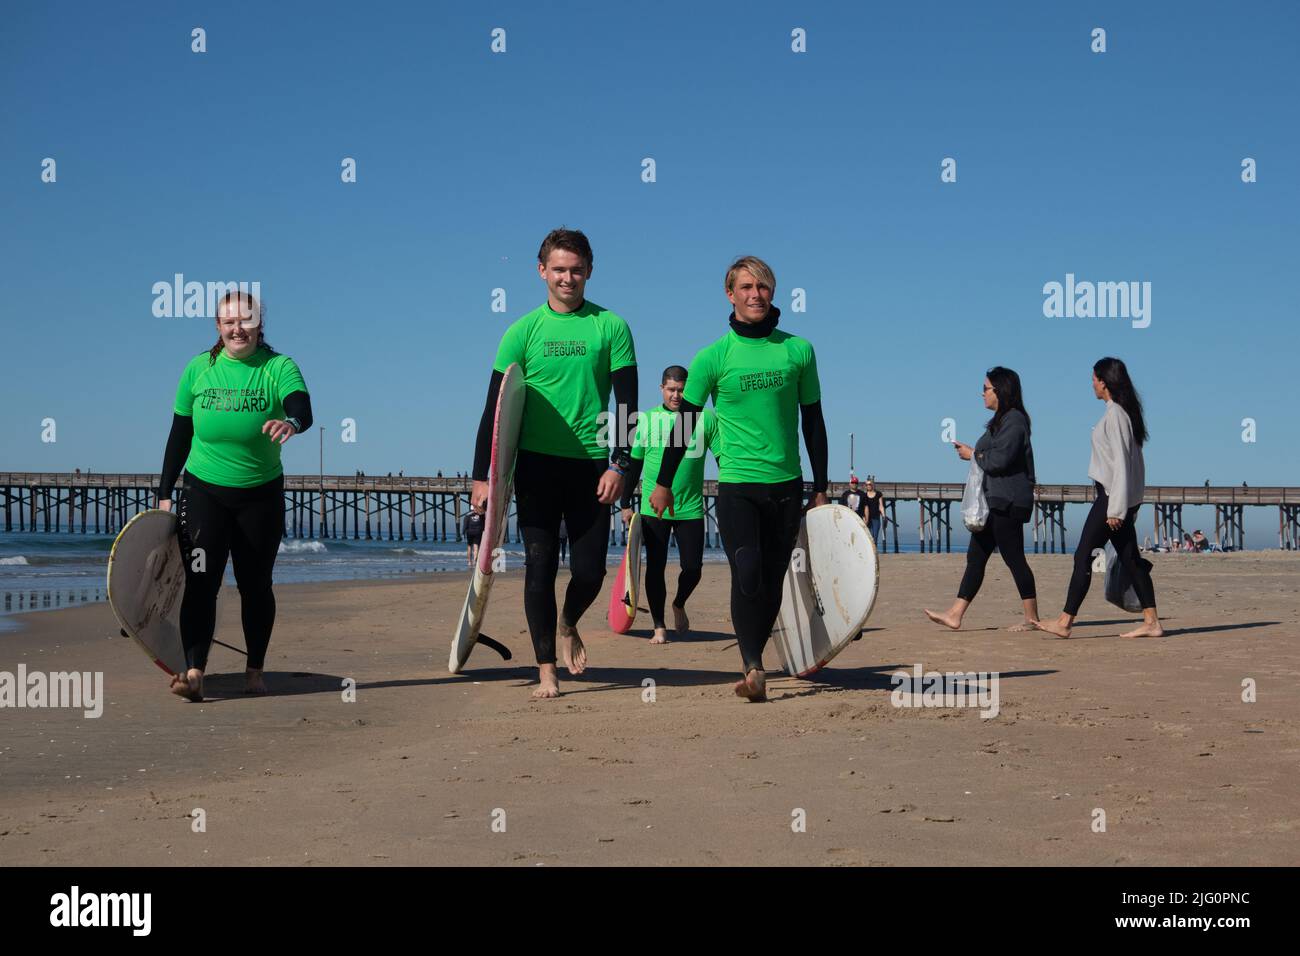 Four young lifeguards wearing green tops carrying surfboards walking proudly along the beach at Newport Beach California USA Stock Photo